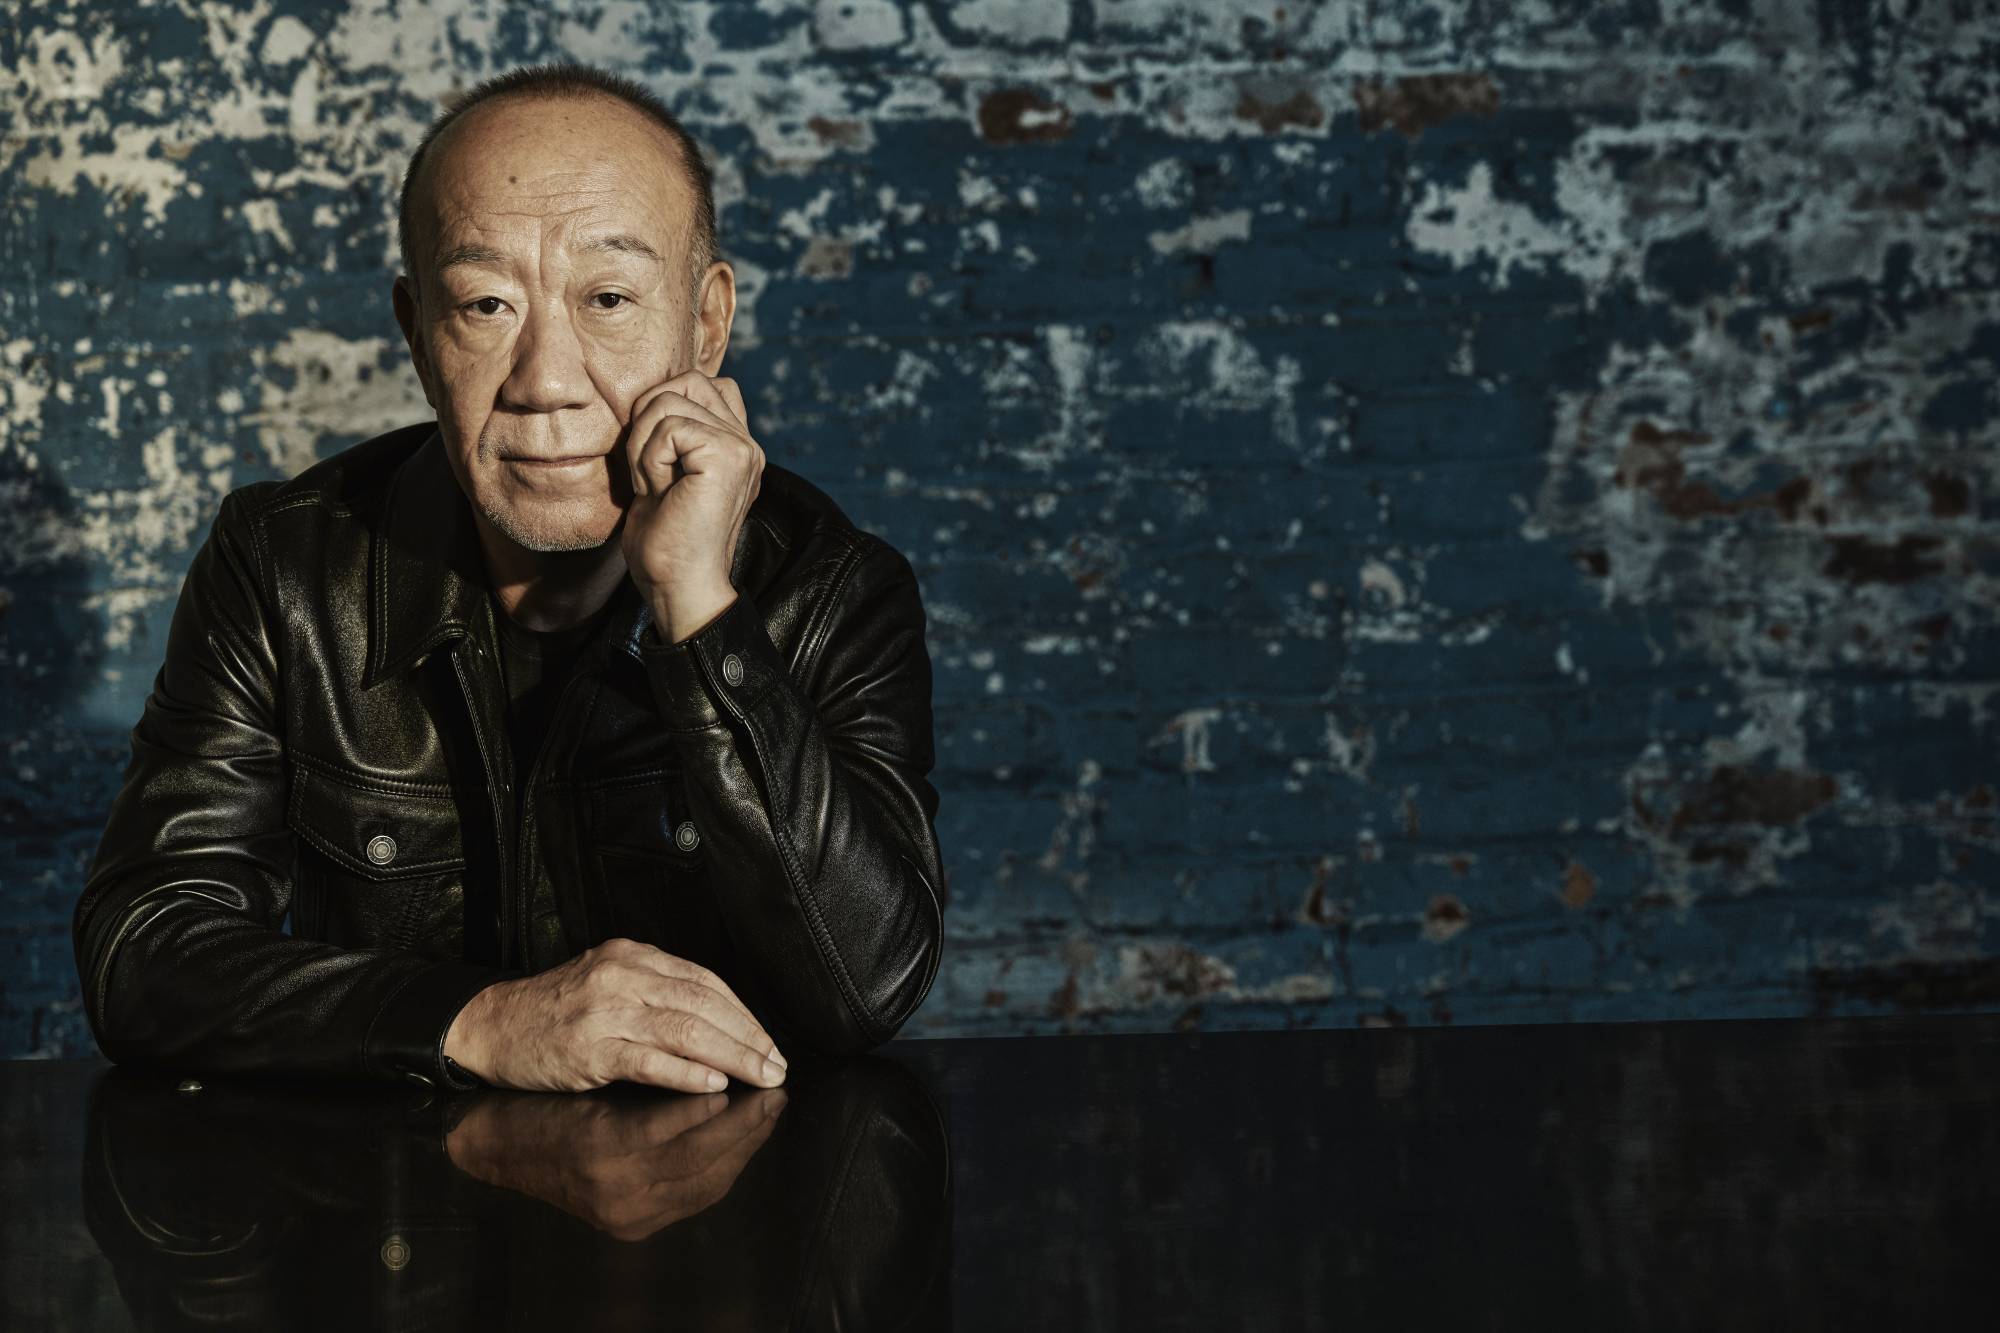 Joe Hisaishi leaning on a piano in front of a blue wall smiling into the camera.